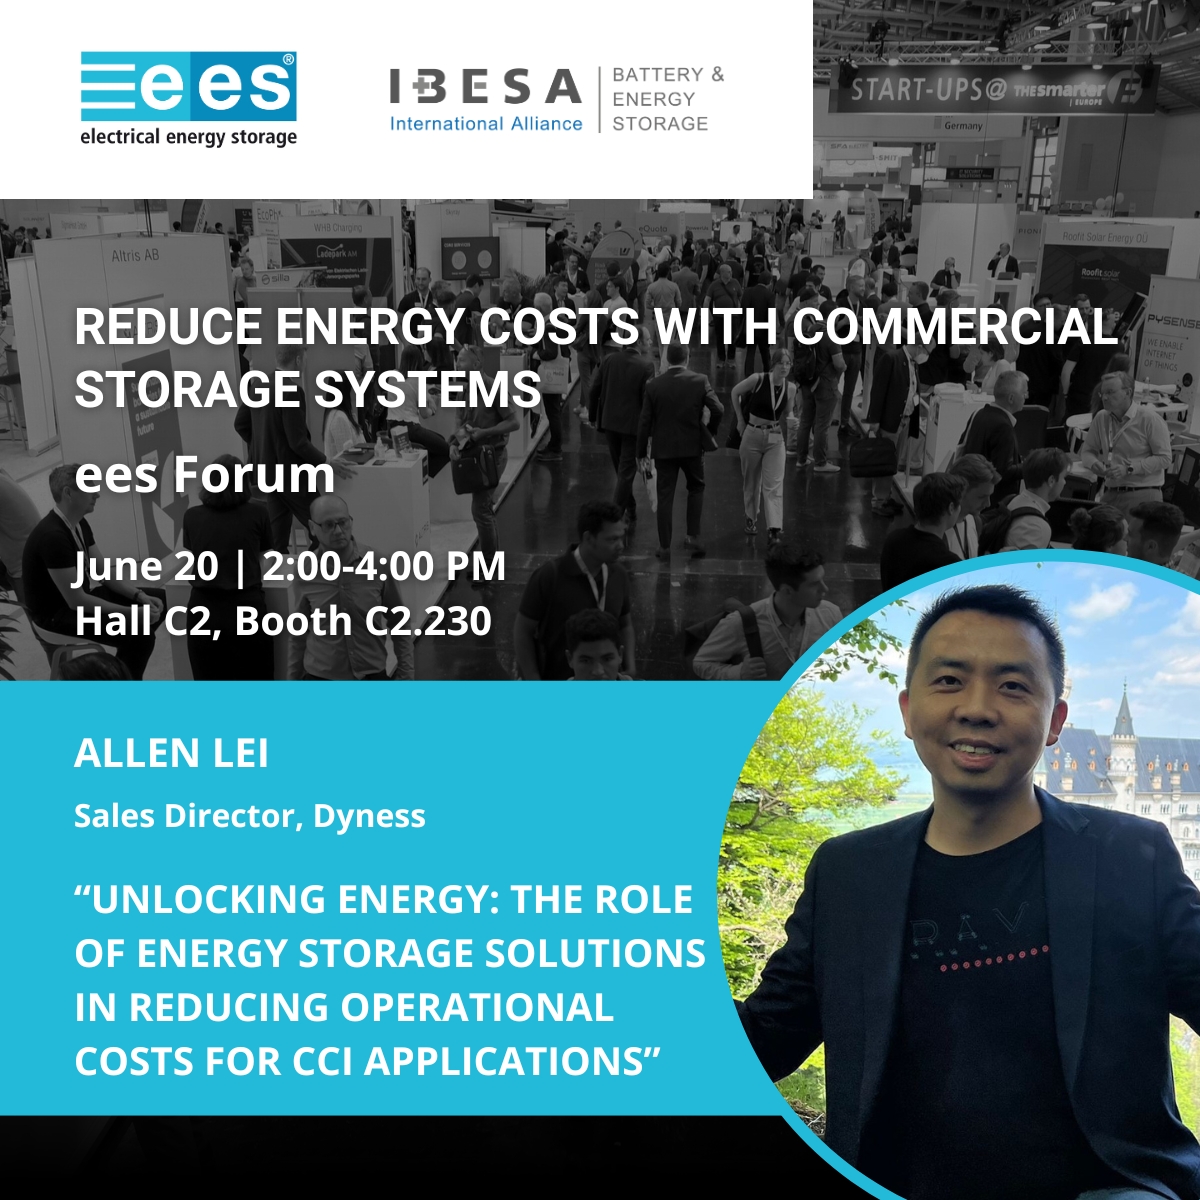 🌟 Join us at #InterSolar Europe 2024 where Dyness Sales Director, Allen, will discuss 'Unlocking Energy: Role of Storage Solutions in cutting CCI operational costs' on June 20 at 2-4 PM in Hall C2, Booth C2.230. Don't miss this enlightening session! #Dyness #InterSolarEurope